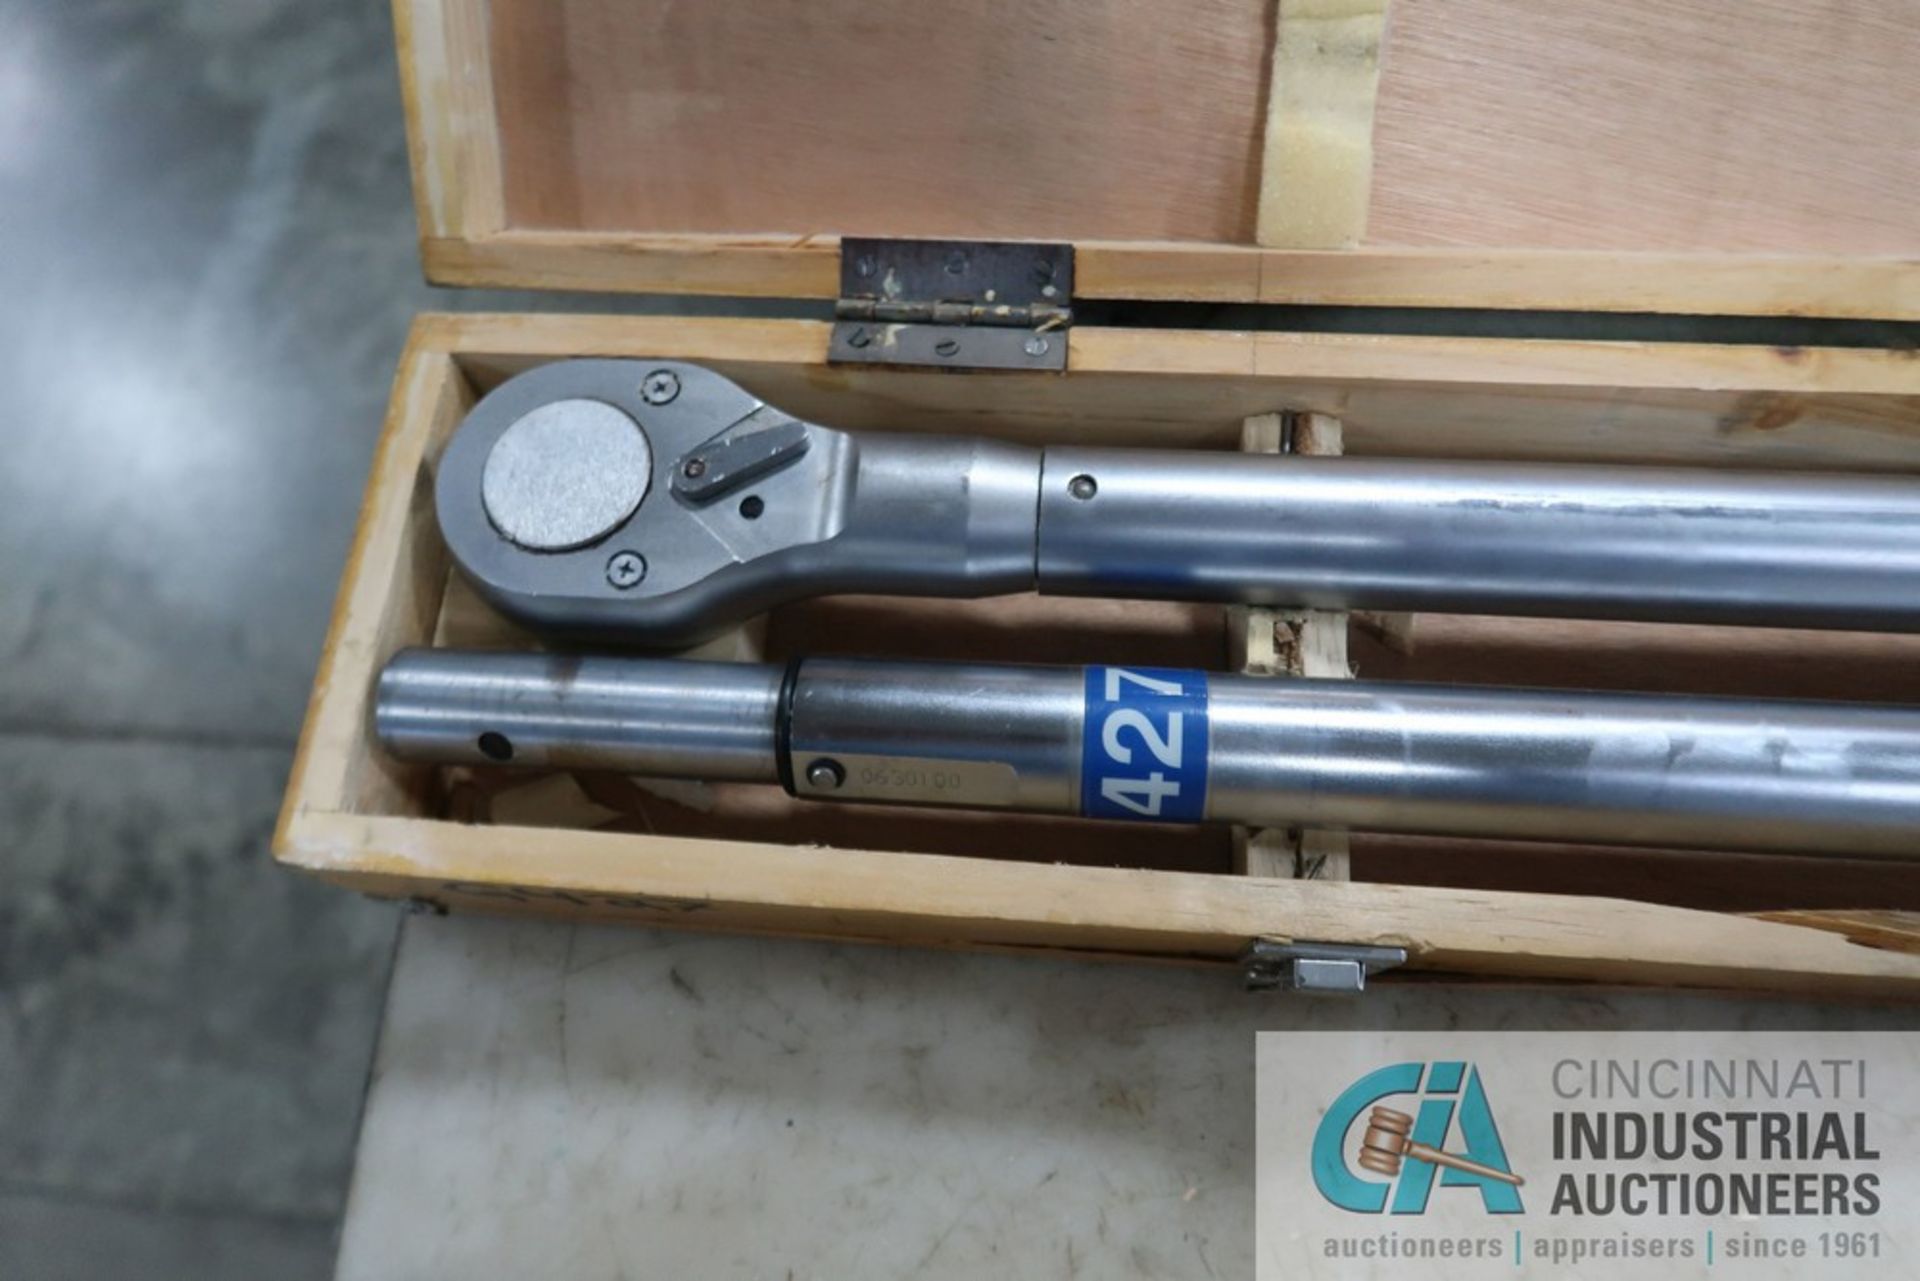 500-1500 LBF/FT NULINE 1" DRIVE TORQUE WRENCH - Image 2 of 2